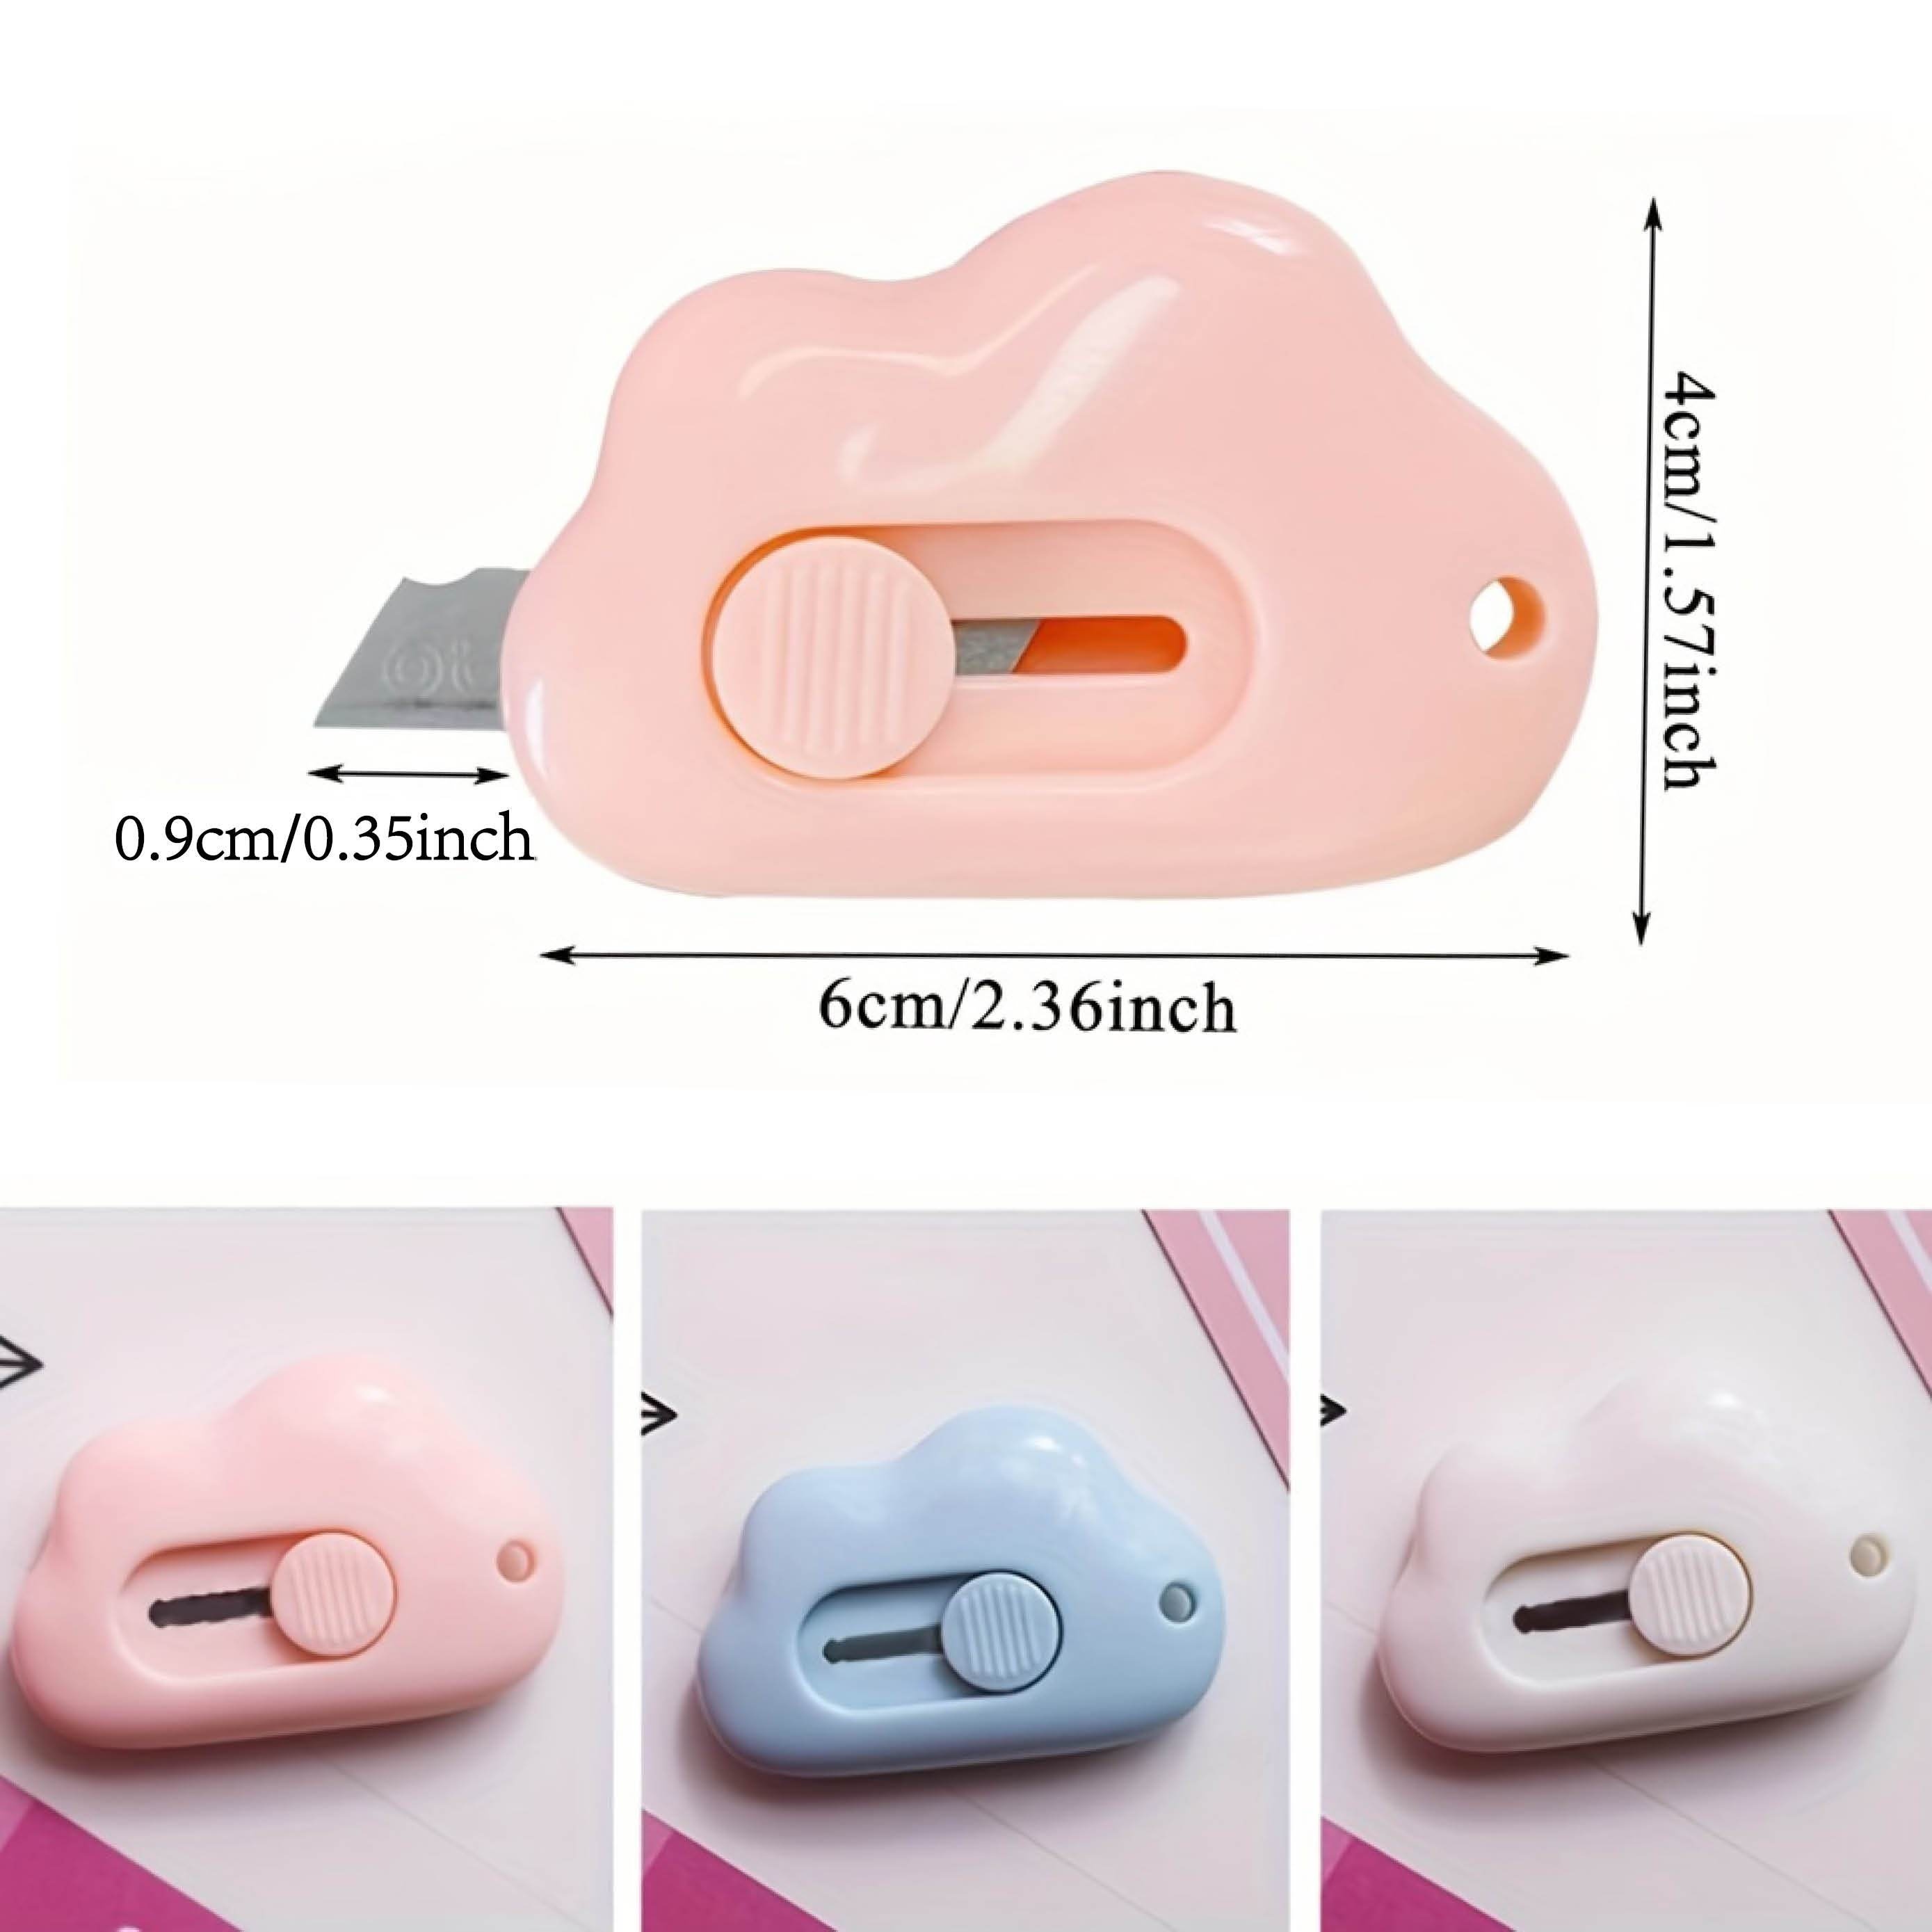 Dropship 1pc TIANSE Mini Retractable Cloud Shaped Utility Knife Art Knife  With Alloy Steel Splicing Knife Portable Letter Opener For Cutting Paper  Cardboard Office School Stationery Tools to Sell Online at a